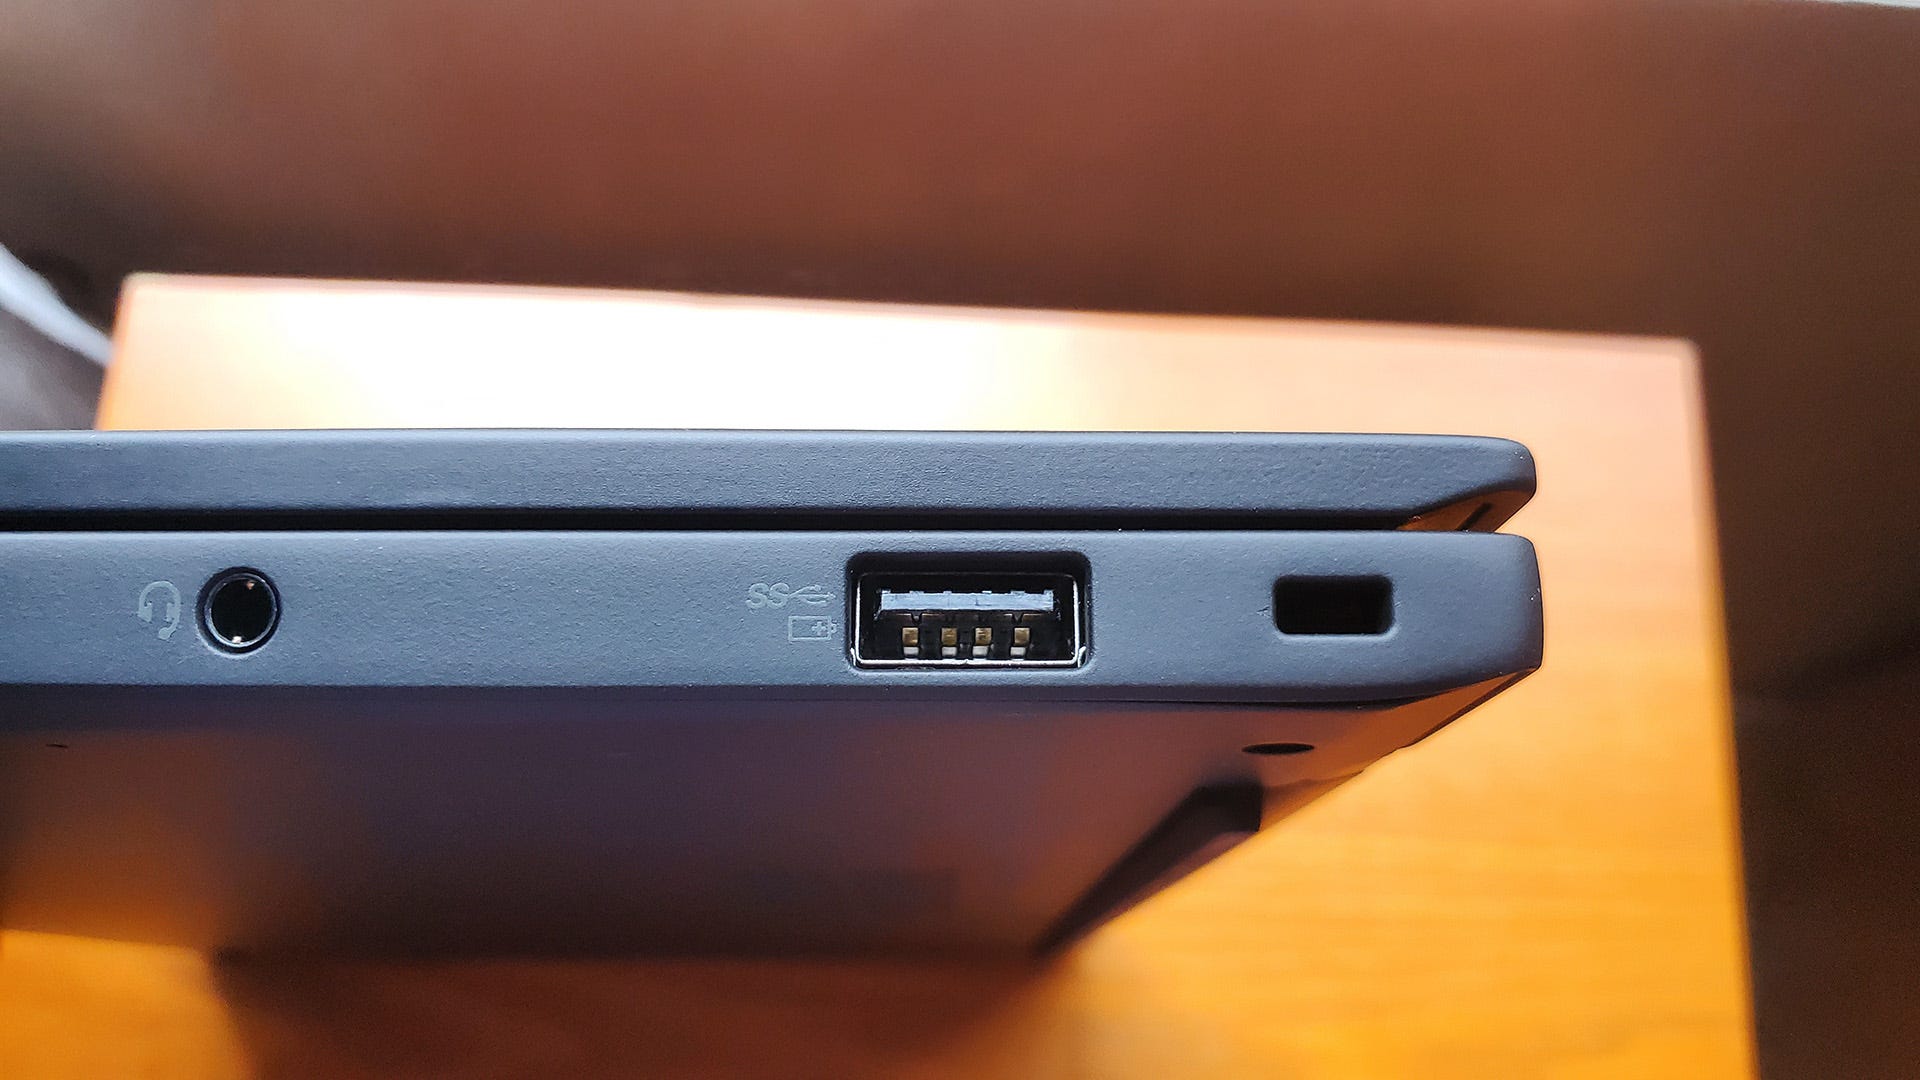 The Lenovo ThinkPad X1 Carbon laptop's right side with ports.